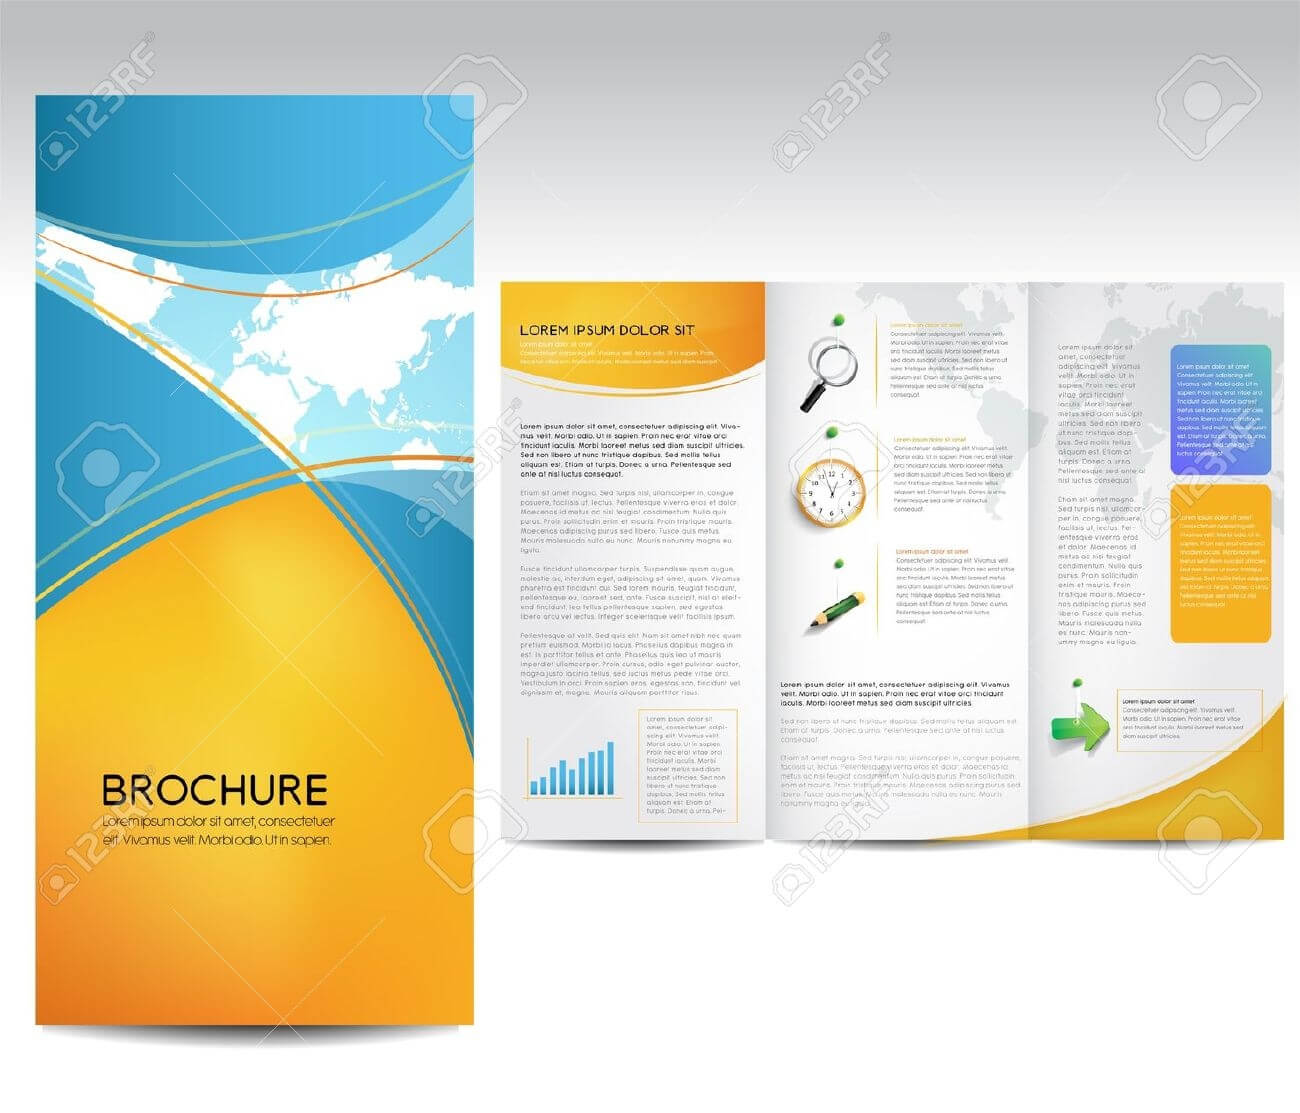 004 Template Ideas Free Brochure Templates For Word Awesome For Free Brochure Templates For Word 2010